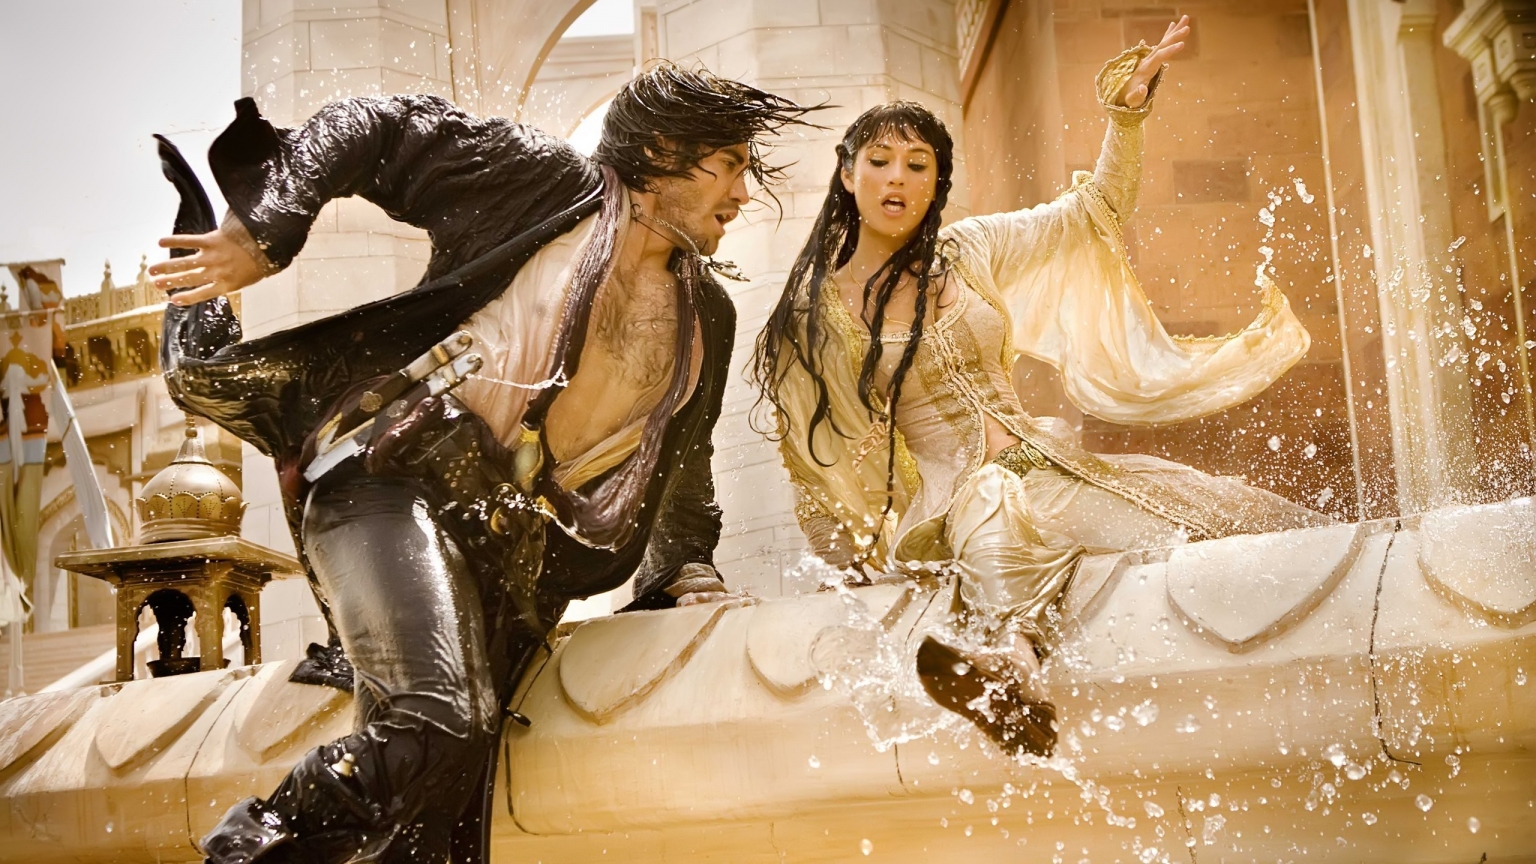 Prince Of Persia: The Sands of Time Movie for 1536 x 864 HDTV resolution